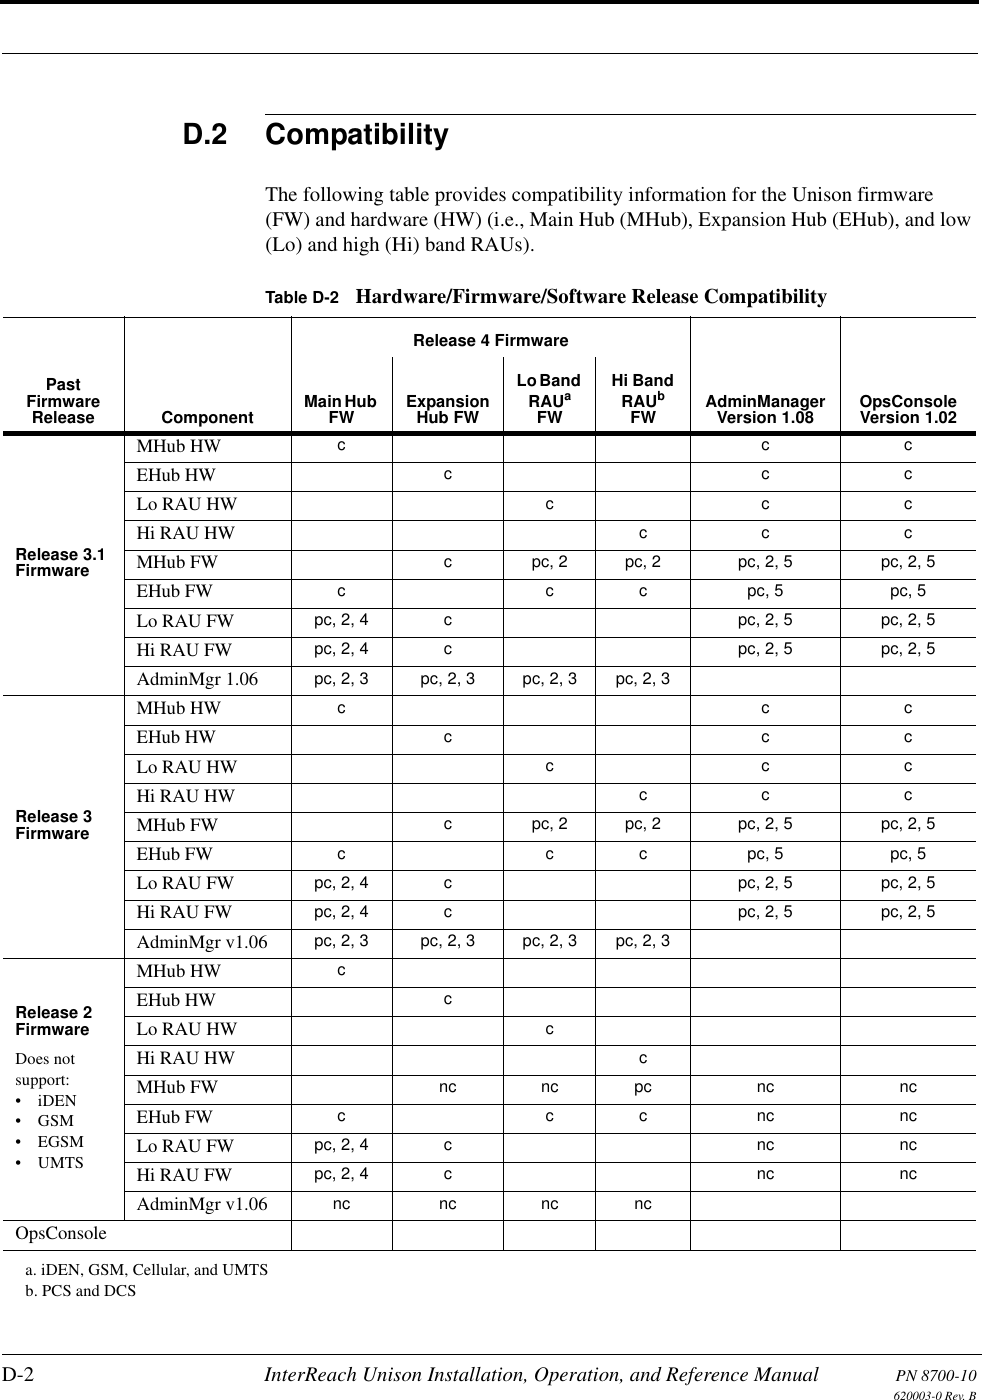 D-2 InterReach Unison Installation, Operation, and Reference Manual PN 8700-10620003-0 Rev. BD.2 CompatibilityThe following table provides compatibility information for the Unison firmware (FW) and hardware (HW) (i.e., Main Hub (MHub), Expansion Hub (EHub), and low (Lo) and high (Hi) band RAUs).Table D-2 Hardware/Firmware/Software Release CompatibilityPast Firmware Release ComponentRelease 4 FirmwareAdminManagerVersion 1.08 OpsConsoleVersion 1.02Main Hub FW Expansion Hub FWLo Band RAUa FWa. iDEN, GSM, Cellular, and UMTSHi Band RAUb FWb. PCS and DCSRelease 3.1FirmwareMHub HW cccEHub HW cccLo RAU HW cccHi RAU HW cc cMHub FW c pc, 2 pc, 2 pc, 2, 5 pc, 2, 5EHub FW c c c pc, 5 pc, 5Lo RAU FW pc, 2, 4 c pc, 2, 5 pc, 2, 5Hi RAU FW pc, 2, 4 c pc, 2, 5 pc, 2, 5AdminMgr 1.06 pc, 2, 3 pc, 2, 3 pc, 2, 3 pc, 2, 3Release 3FirmwareMHub HW cccEHub HW cccLo RAU HW cccHi RAU HW cc cMHub FW c pc, 2 pc, 2 pc, 2, 5 pc, 2, 5EHub FW c c c pc, 5 pc, 5Lo RAU FW pc, 2, 4 c pc, 2, 5 pc, 2, 5Hi RAU FW pc, 2, 4 c pc, 2, 5 pc, 2, 5AdminMgr v1.06 pc, 2, 3 pc, 2, 3 pc, 2, 3 pc, 2, 3Release 2FirmwareDoes not support:•iDEN•GSM•EGSM•UMTSMHub HW cEHub HW cLo RAU HW cHi RAU HW cMHub FW nc nc pc nc ncEHub FW cccncncLo RAU FW pc, 2, 4 c nc ncHi RAU FW pc, 2, 4 c nc ncAdminMgr v1.06 nc nc nc ncOpsConsole